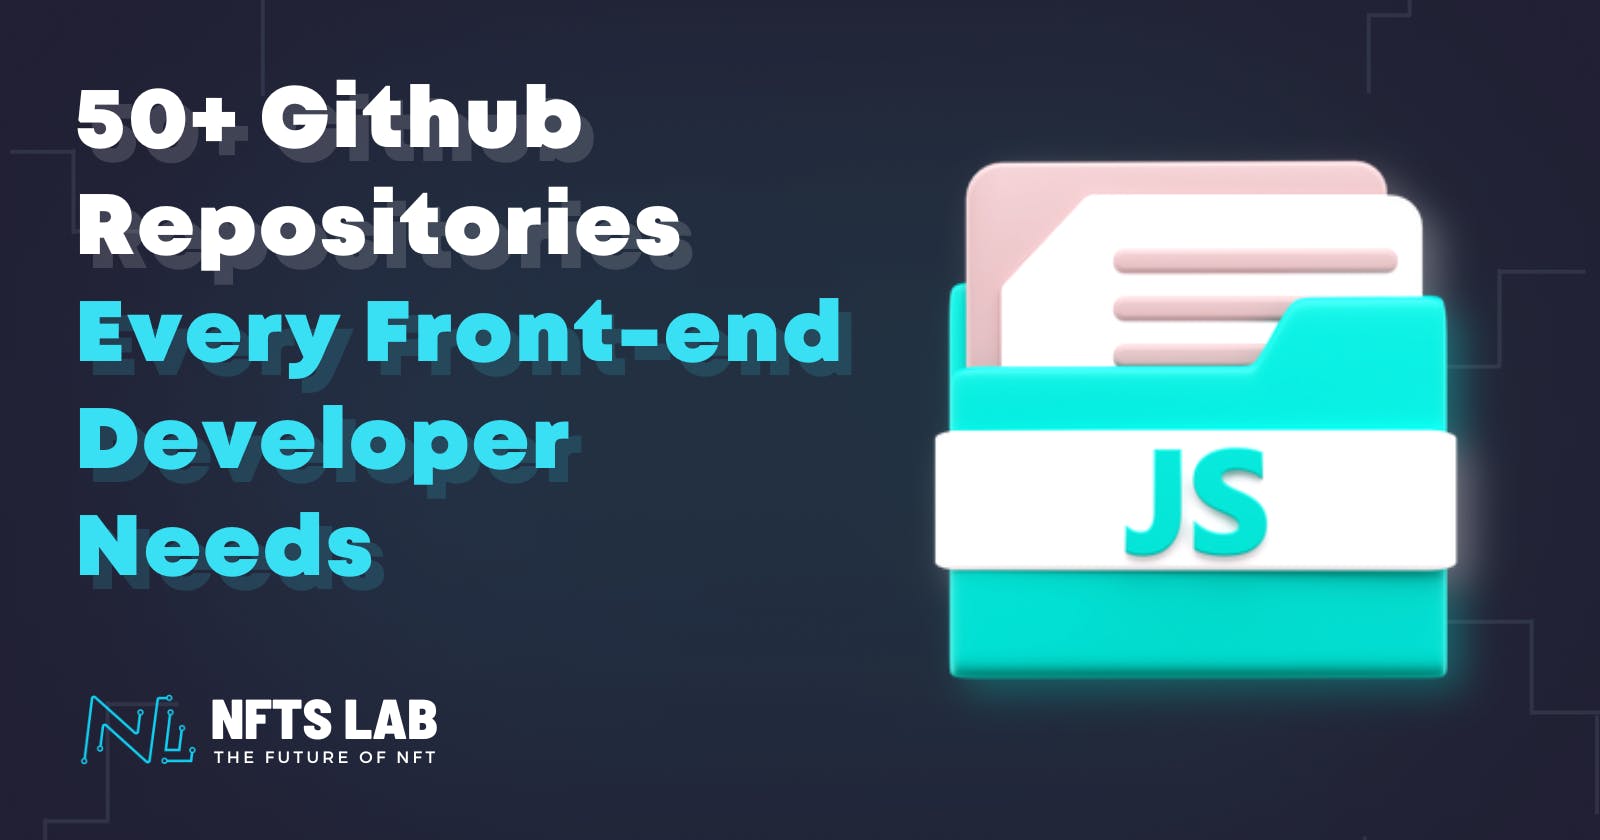 50+ Github Repositories Every Front-end Developer Needs